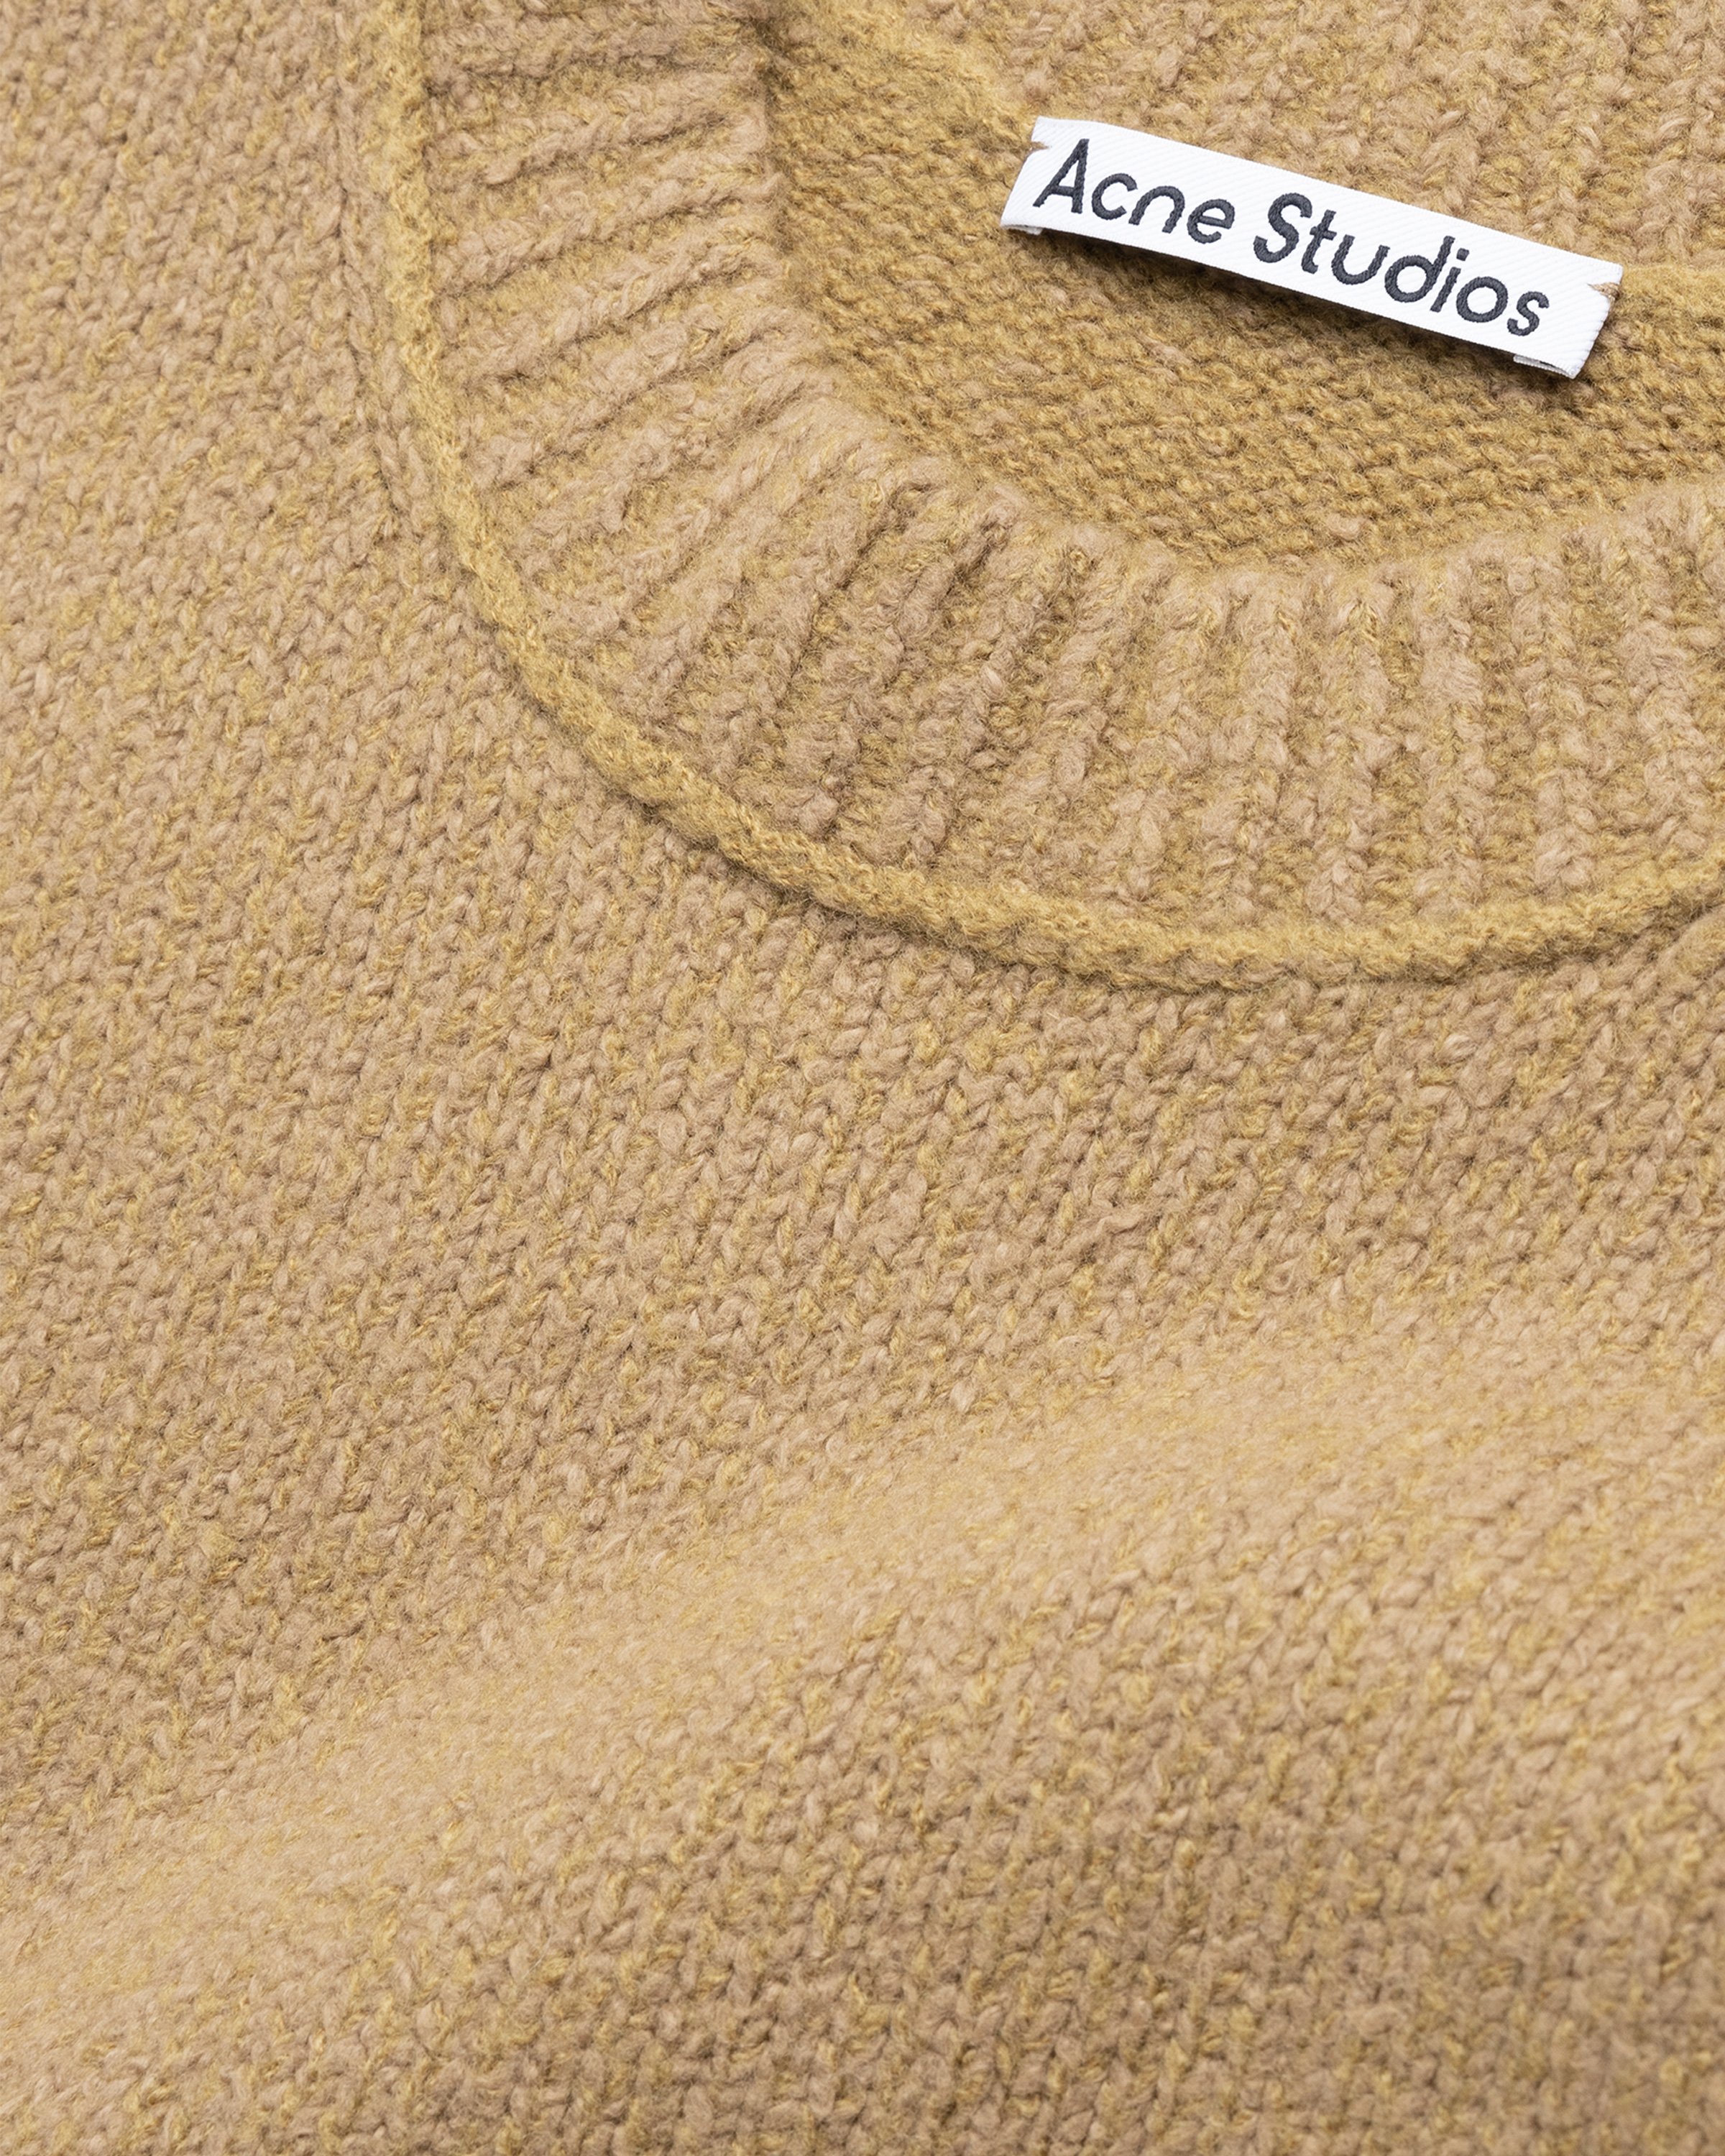 Acne Studios - FN-MN-KNIT000441 - Clothing - Brown - Image 6